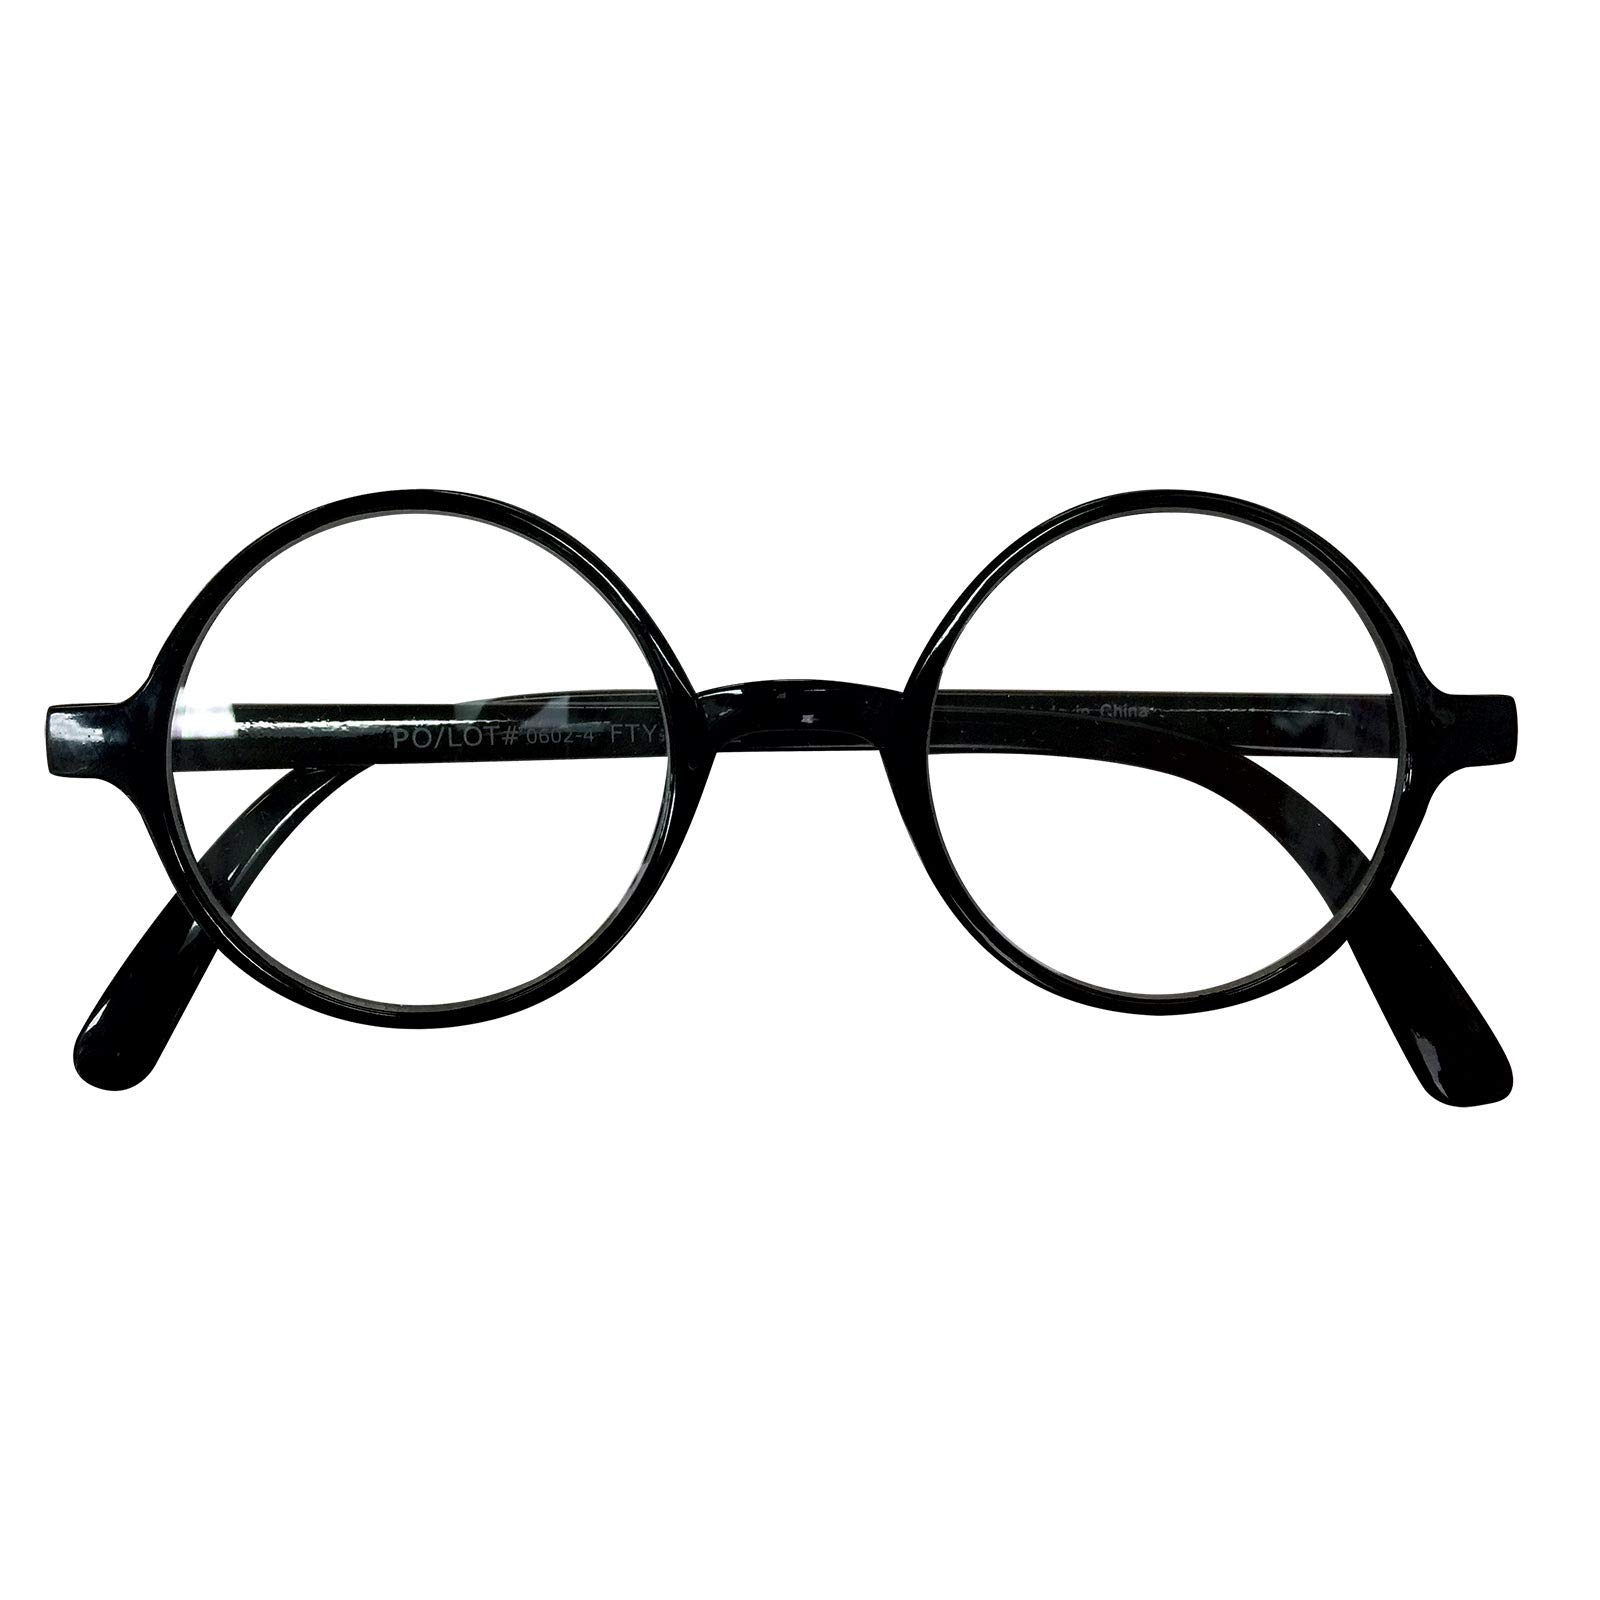 Rubie's Harry Potter Eyeglasses Costume Accessory, One Size, Multicolor